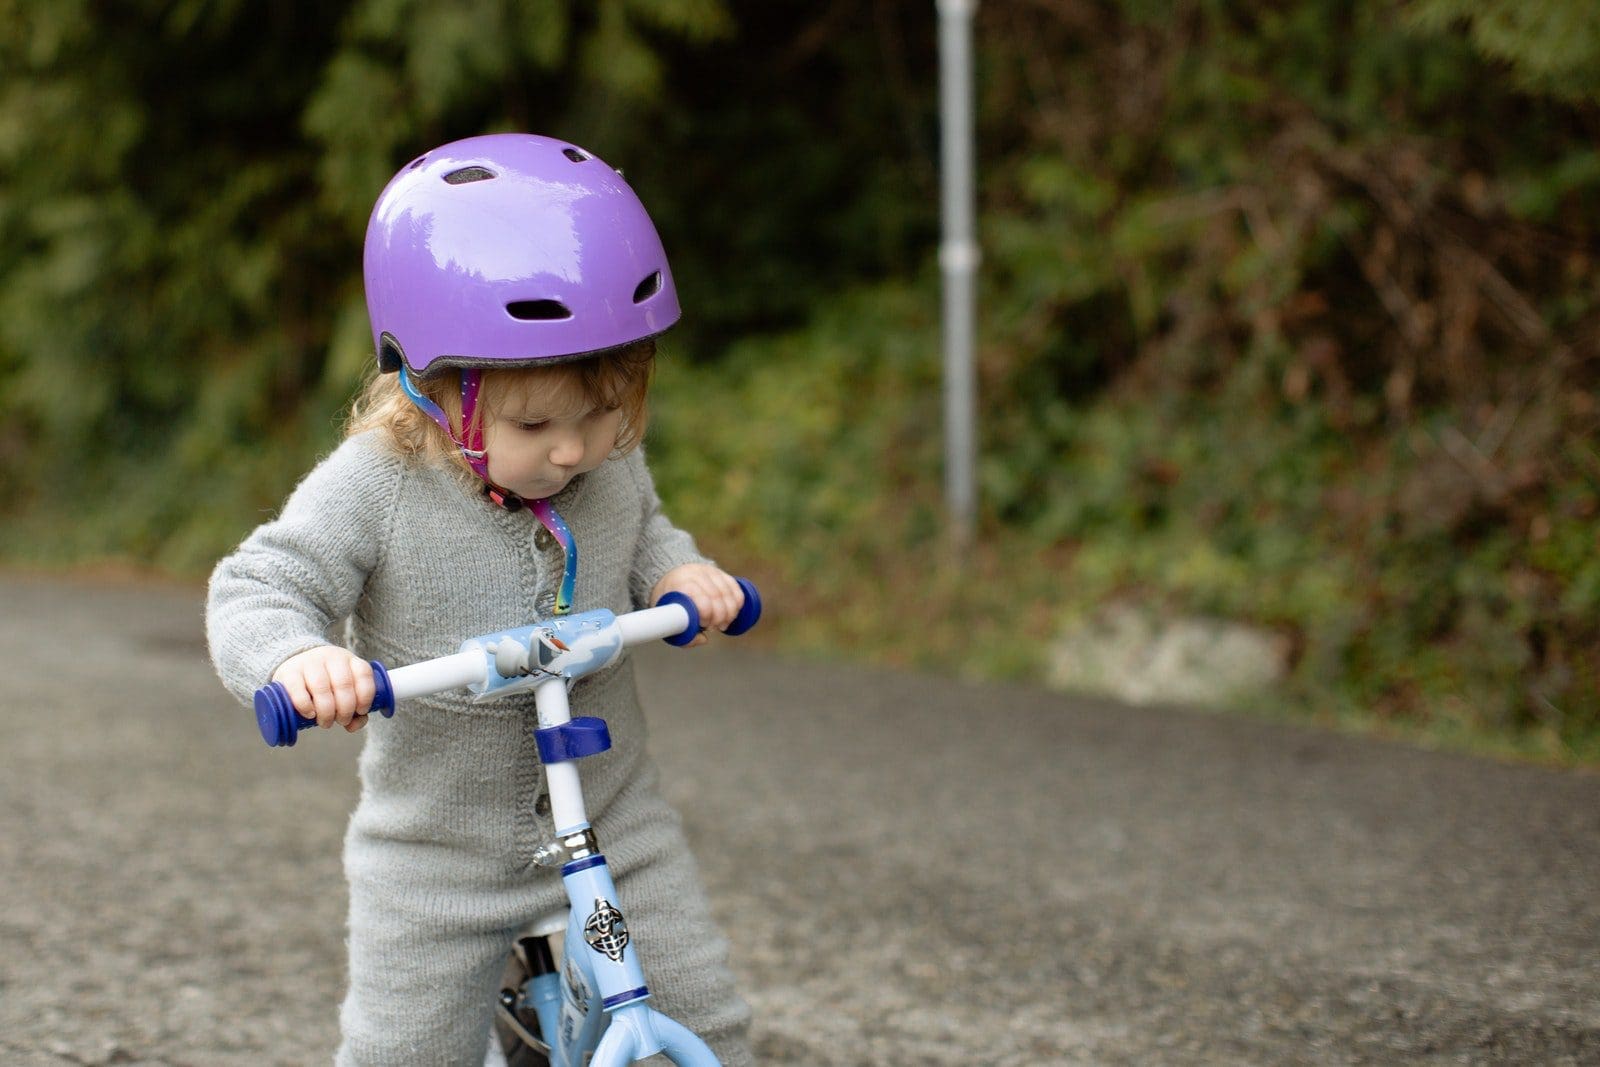 road safety Cute toddler child wearing protective helmet and warm bodysuit playing with bicycle on road near green plants on rural street